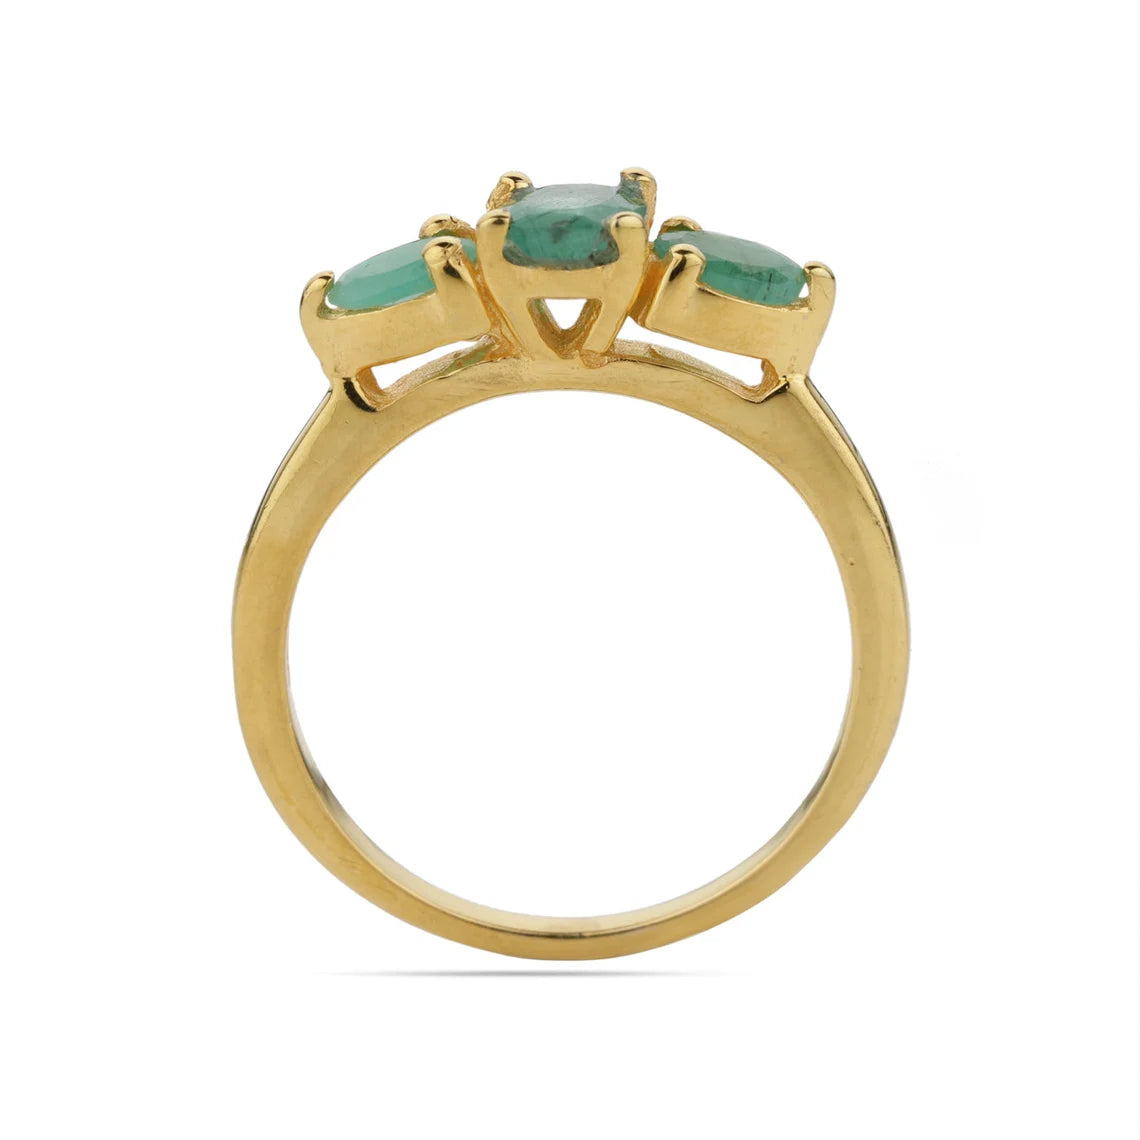 Natural Emerald Gold Ring - Gold Gemstone Ring - 5 X 7 Natural Emerald - Size US 4 - 10 - 18K Gold Silver - Birthstone Ring - Stackable Ring